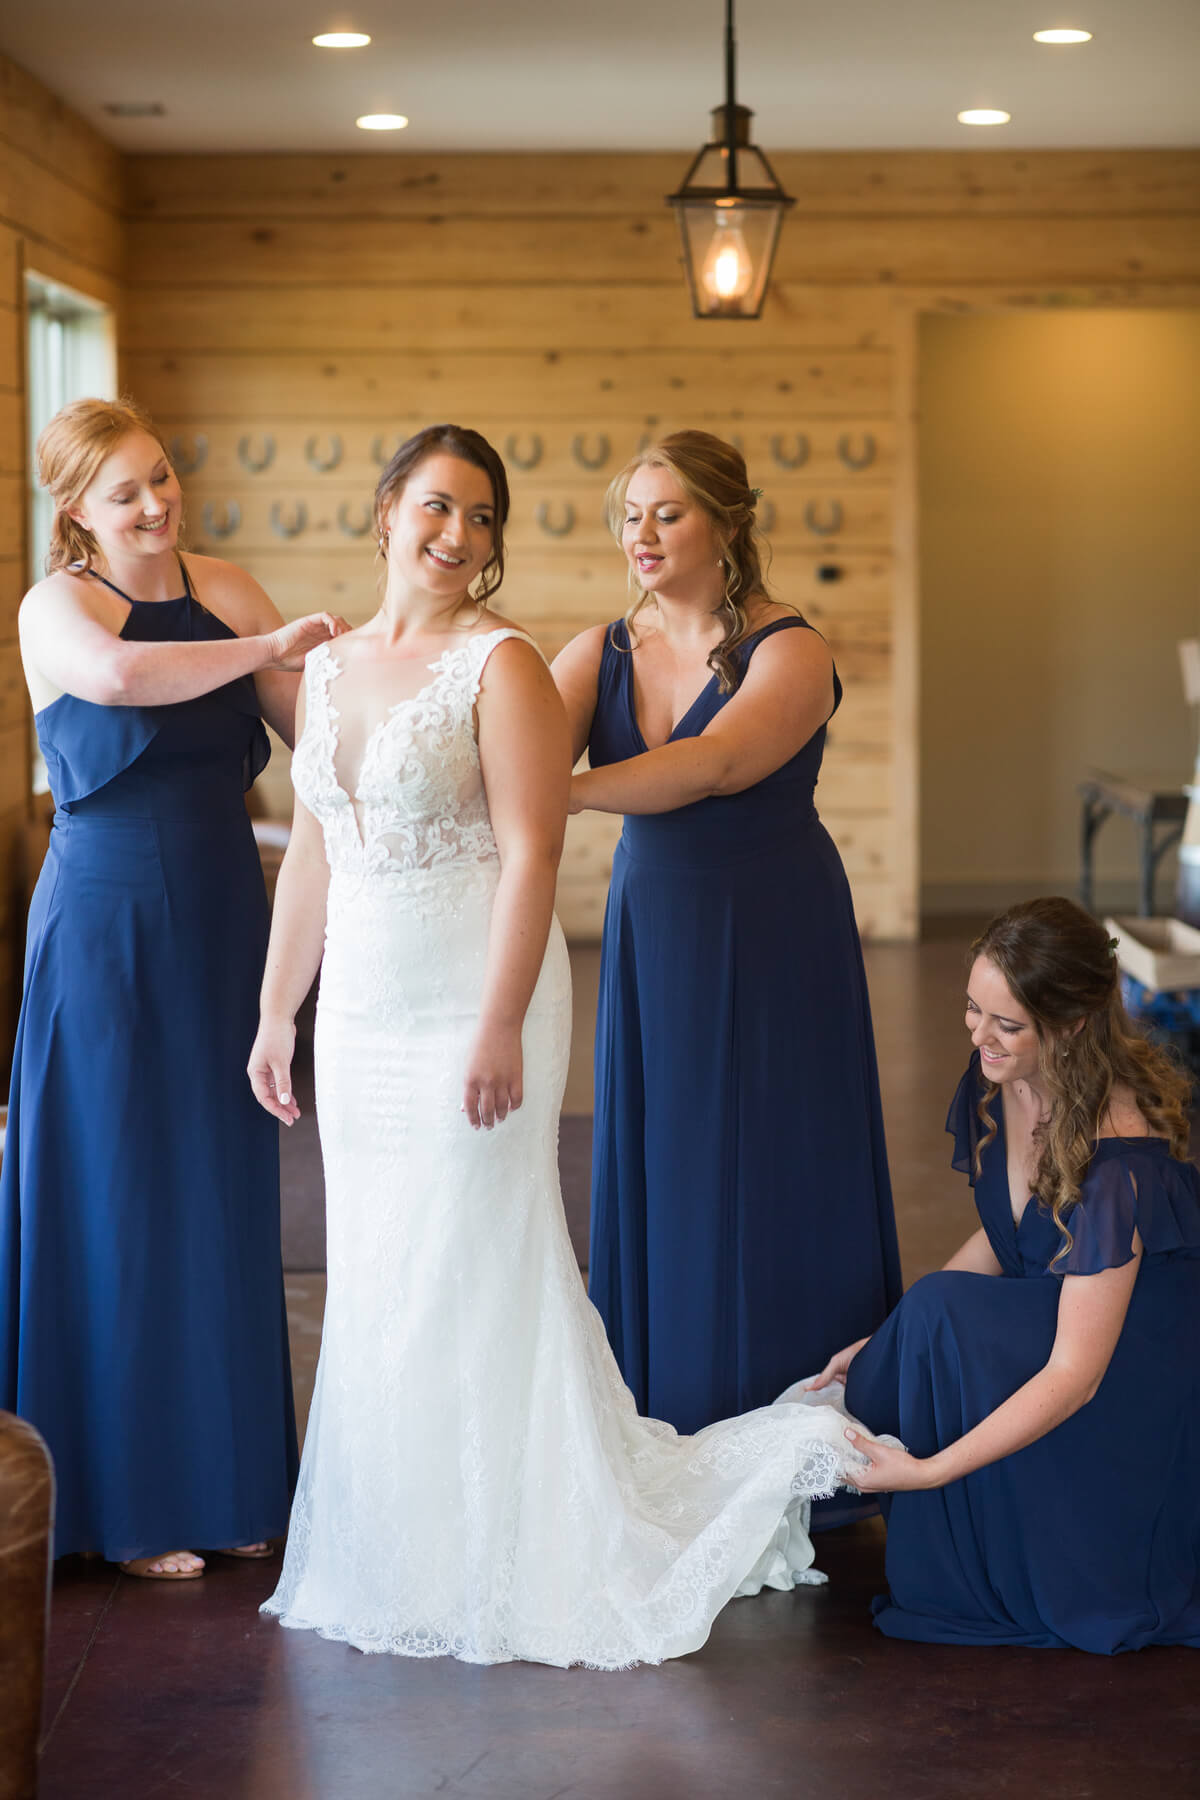 Bridesmaids helping bride get dressed | Fall Wedding at King Family Vineyards by Virginia Photographers